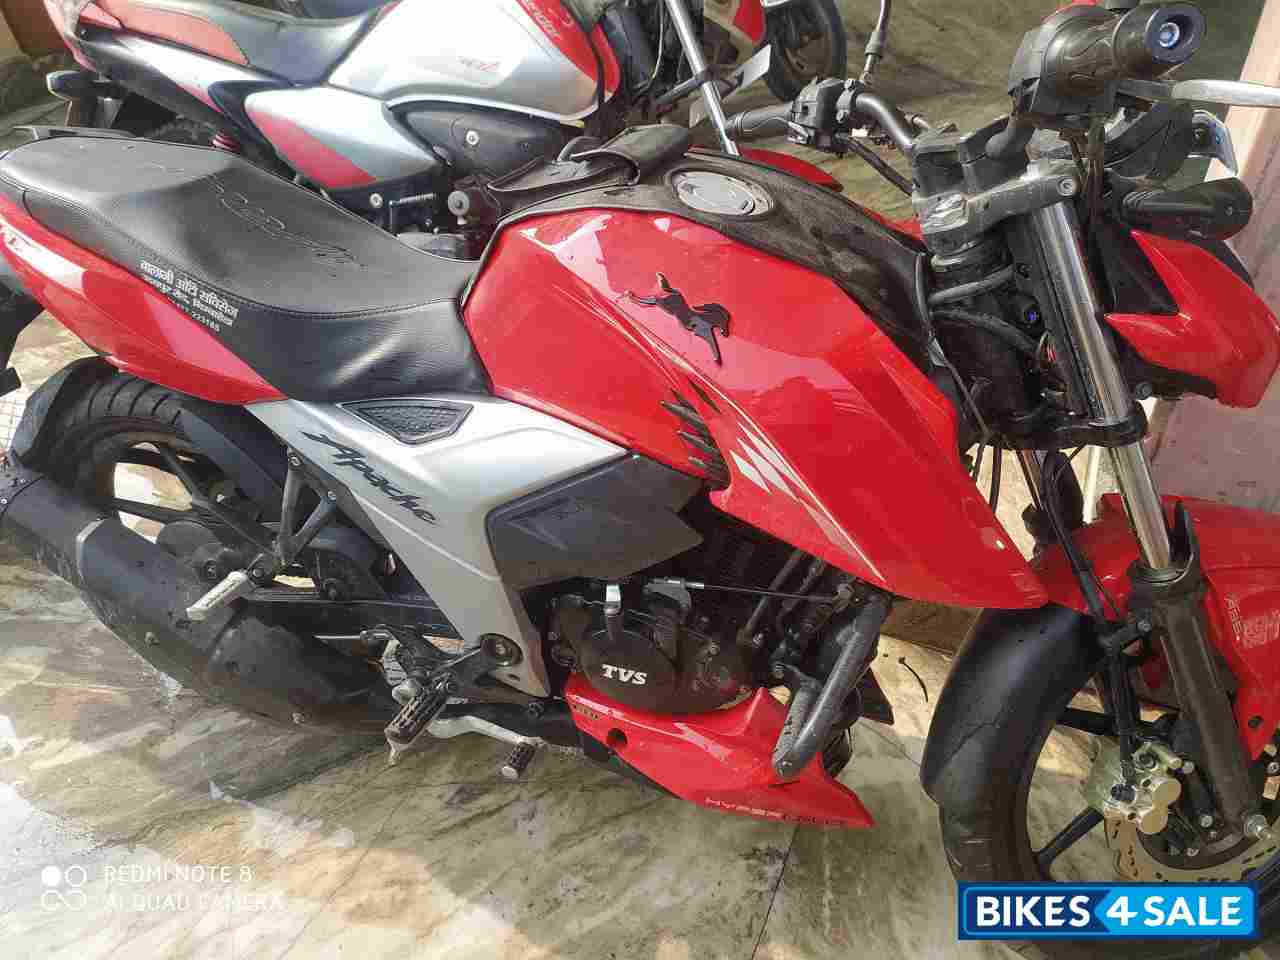 Used Tvs Apache Rtr 160 4v Bs6 For Sale In Chittorgarh Id Bikes4sale